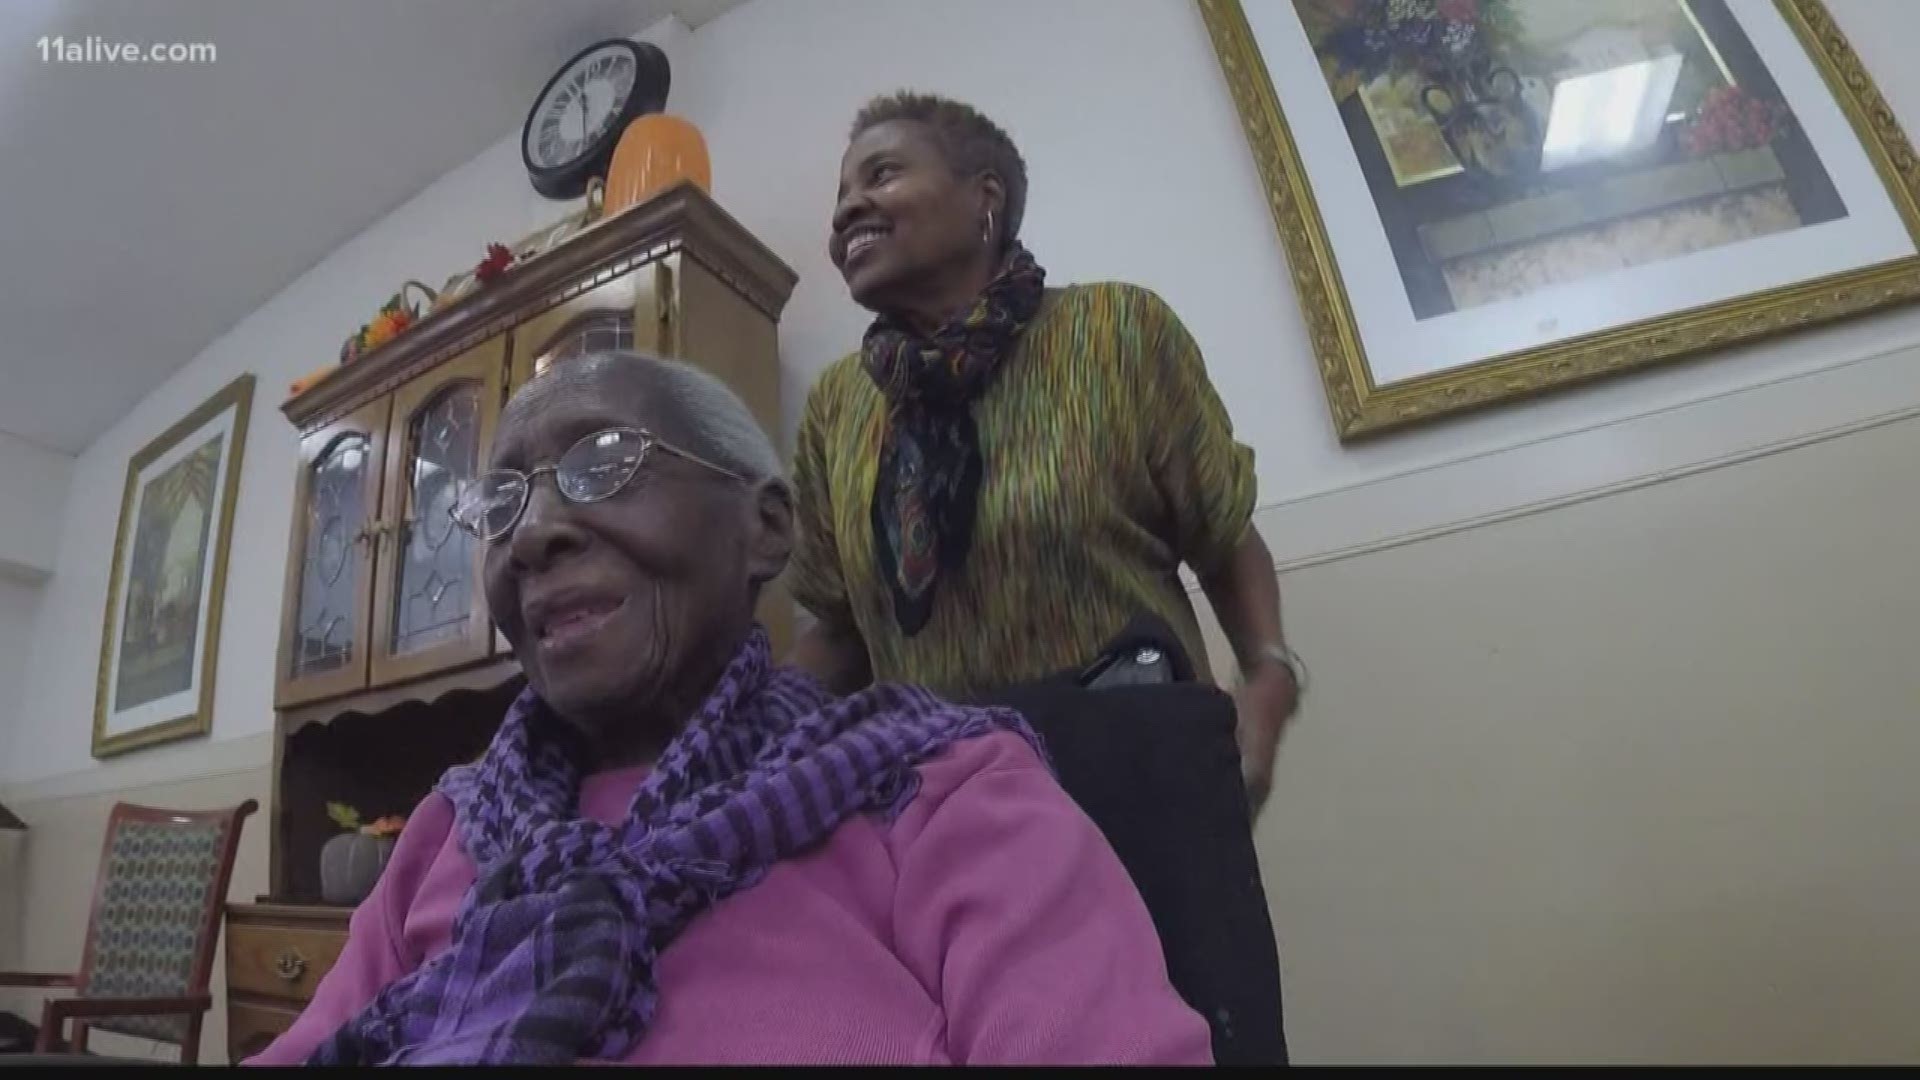 She's a favorite at the Glenwood Heath and Rehabilitation Center in Decatur, but her fame centers around a small dinette she ran in Southwest Atlanta.